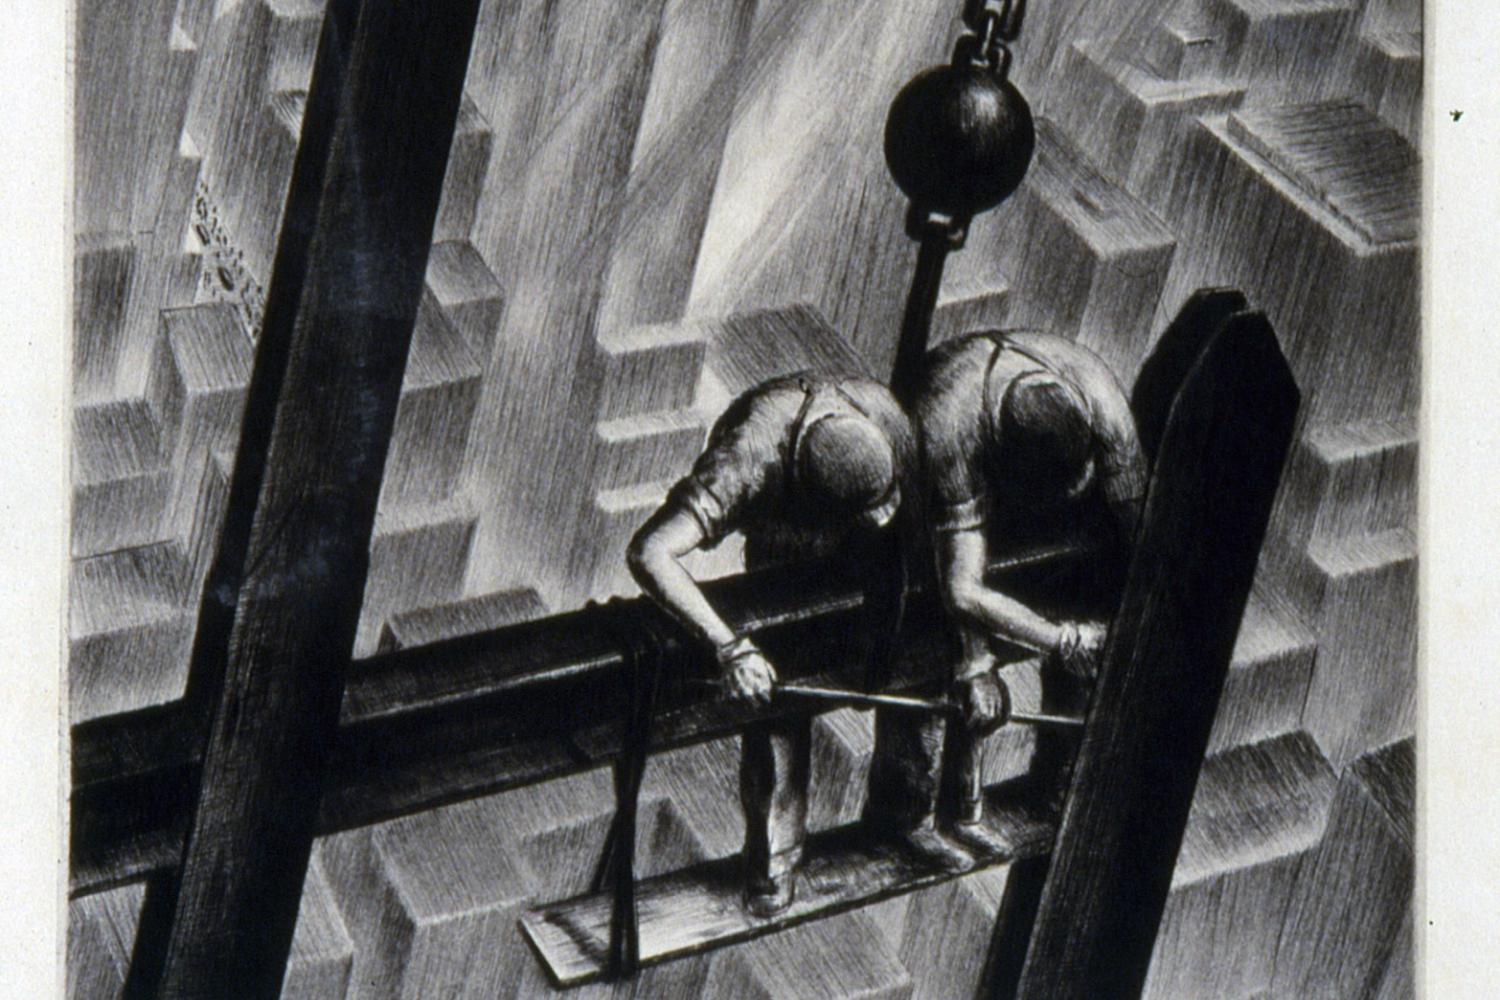 A black and white print featuring two men working on steel beams high above a city.